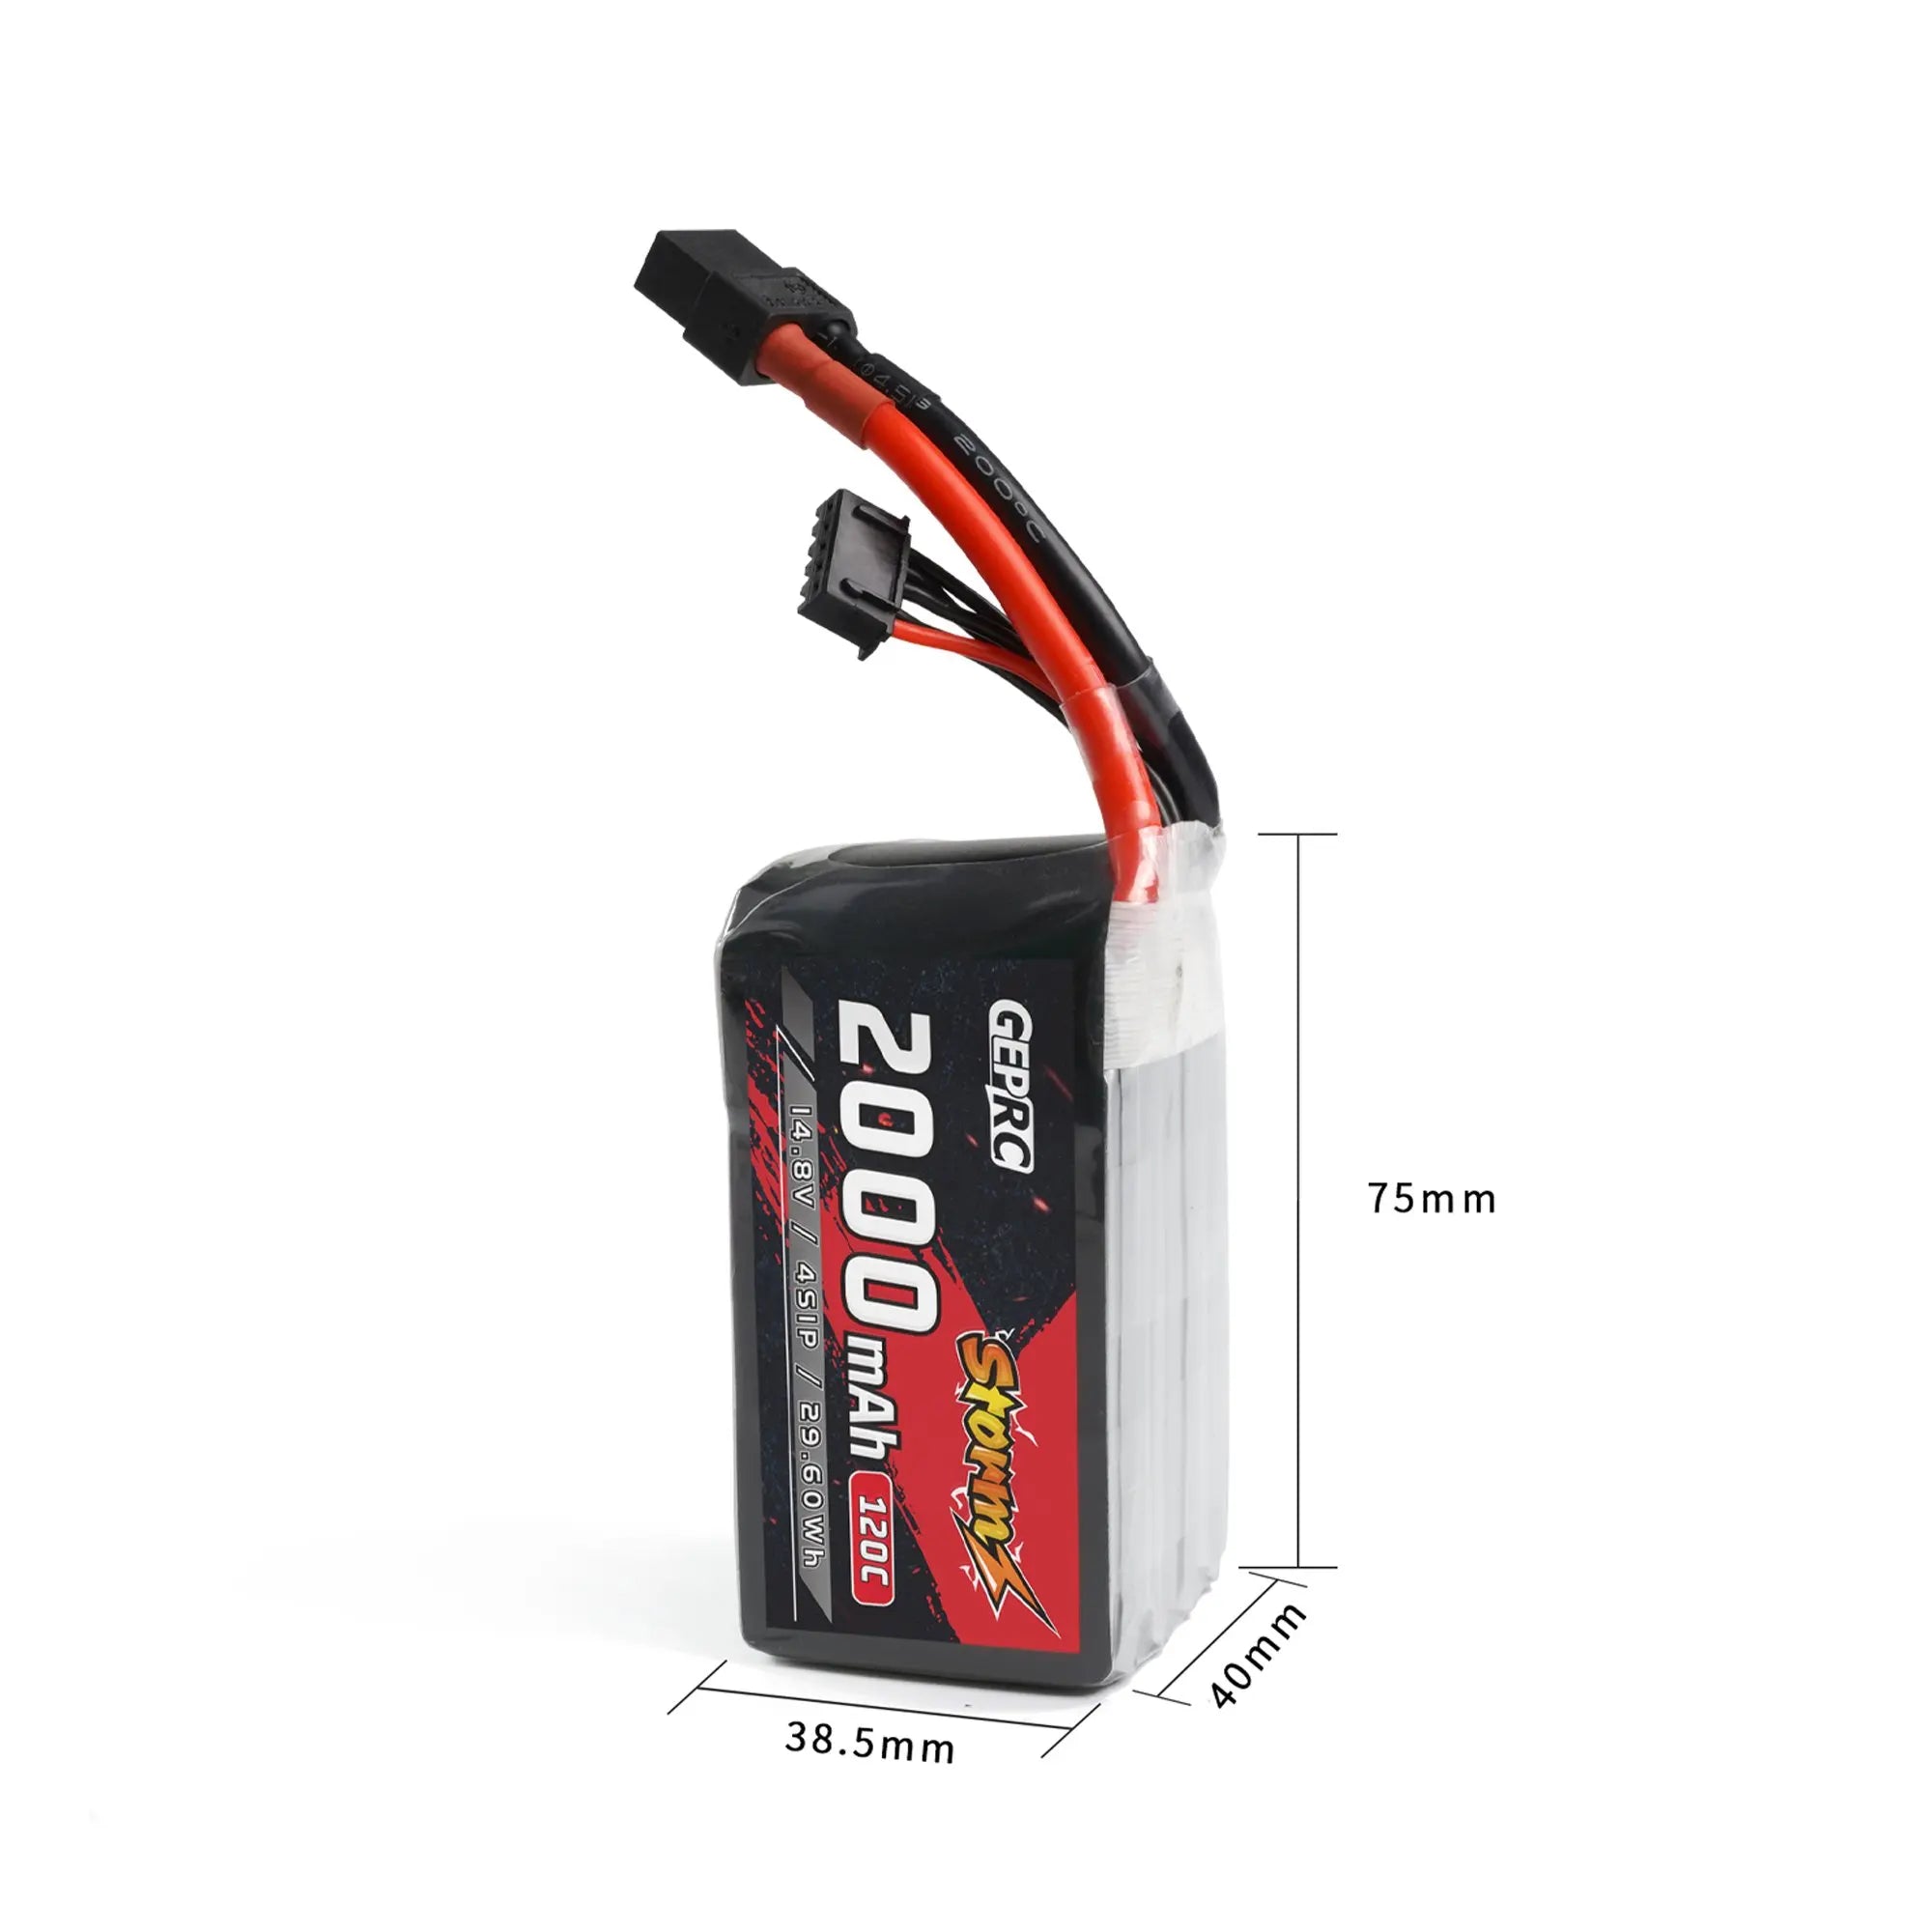 GEPRC Storm 4S 2000mAh 120C Lipo Battery, the charging rate supports up to 3C, and it is recommended to use 1-1.5C 